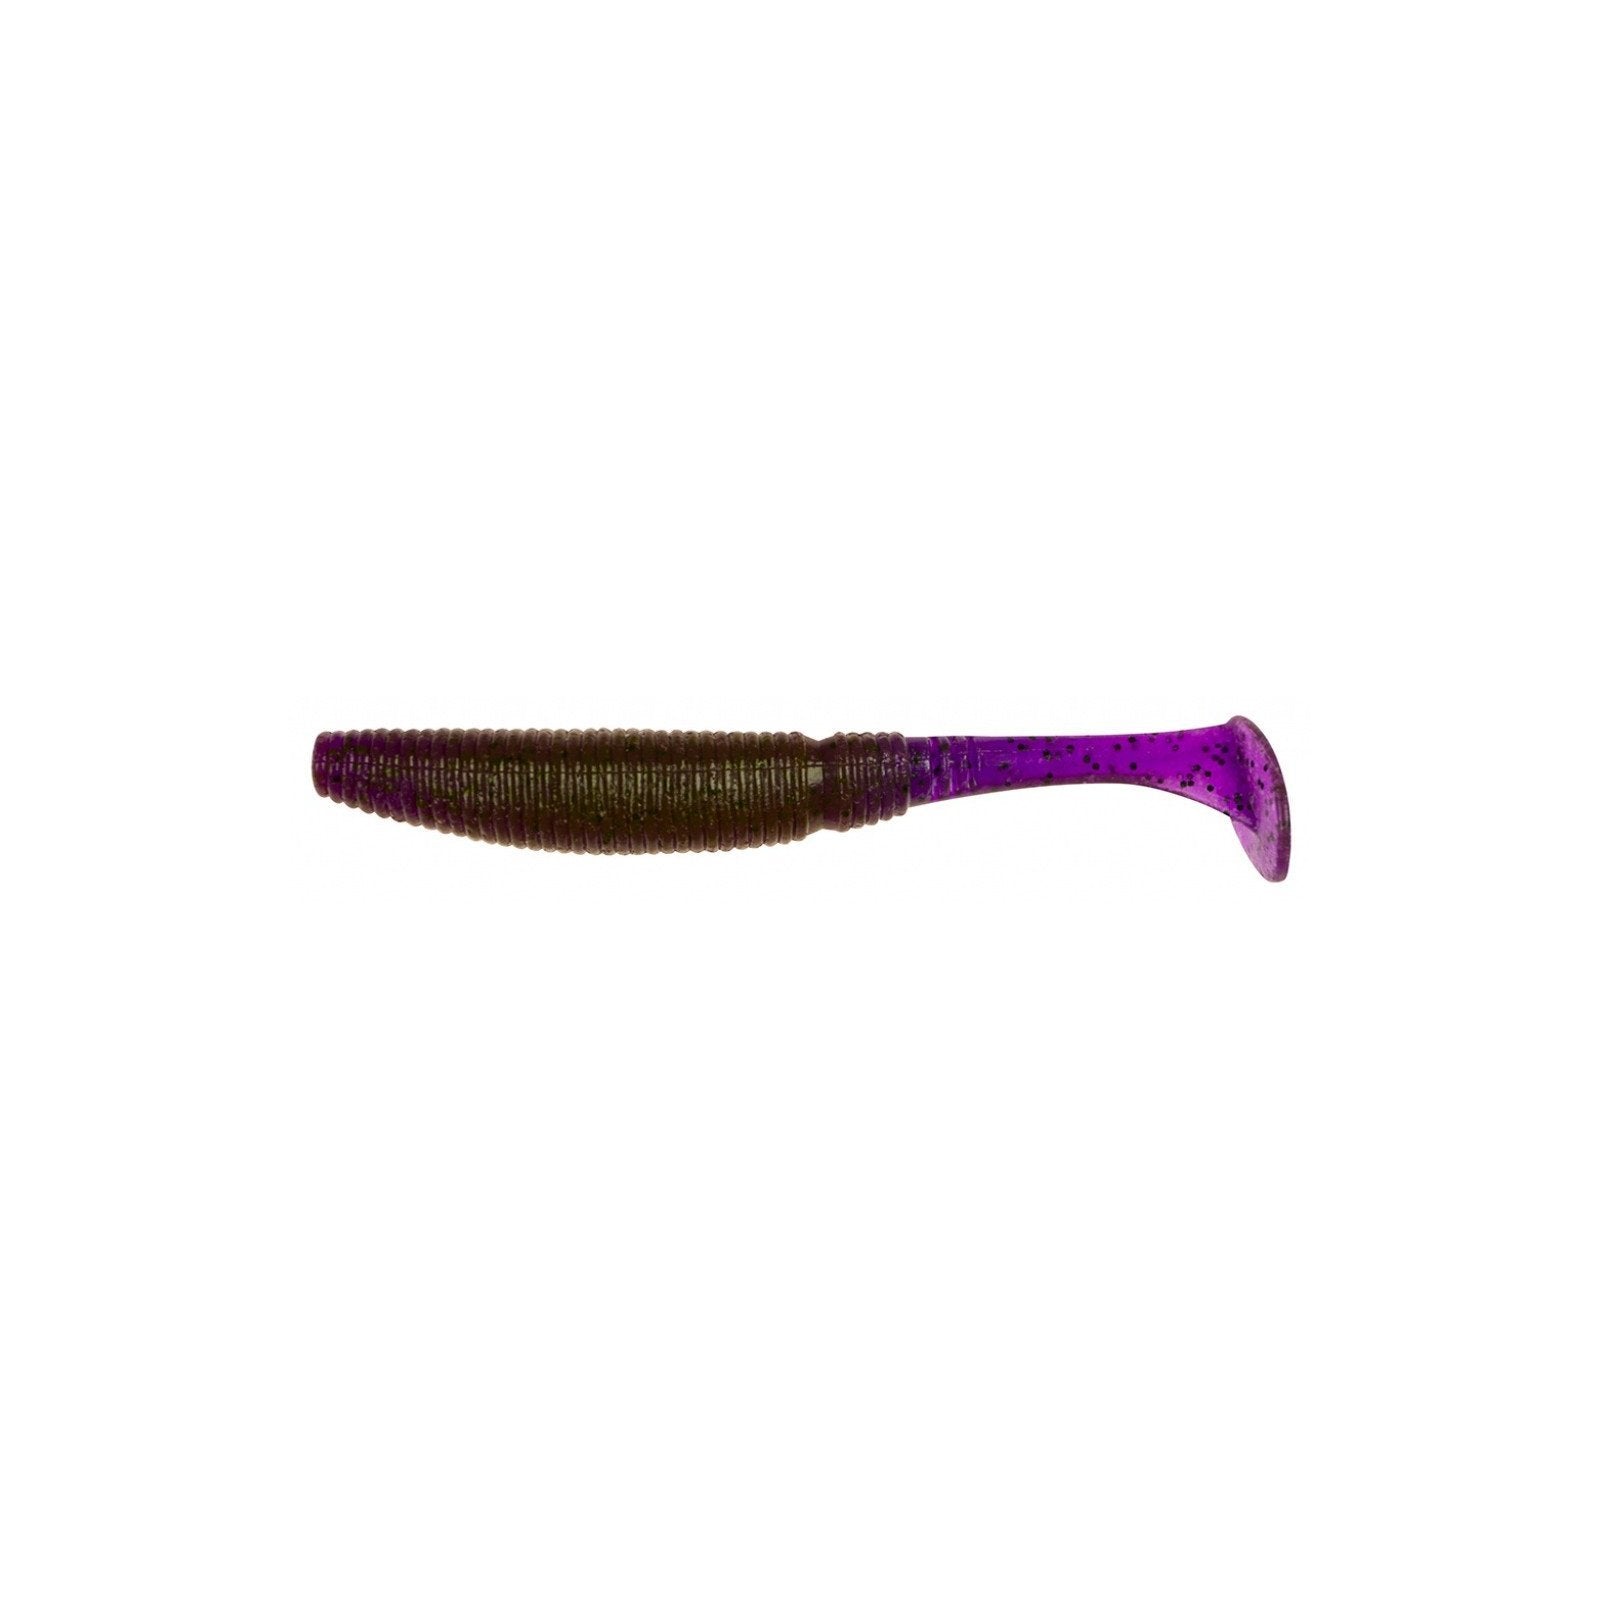 Select Fishing Shad One Gummifisch 888